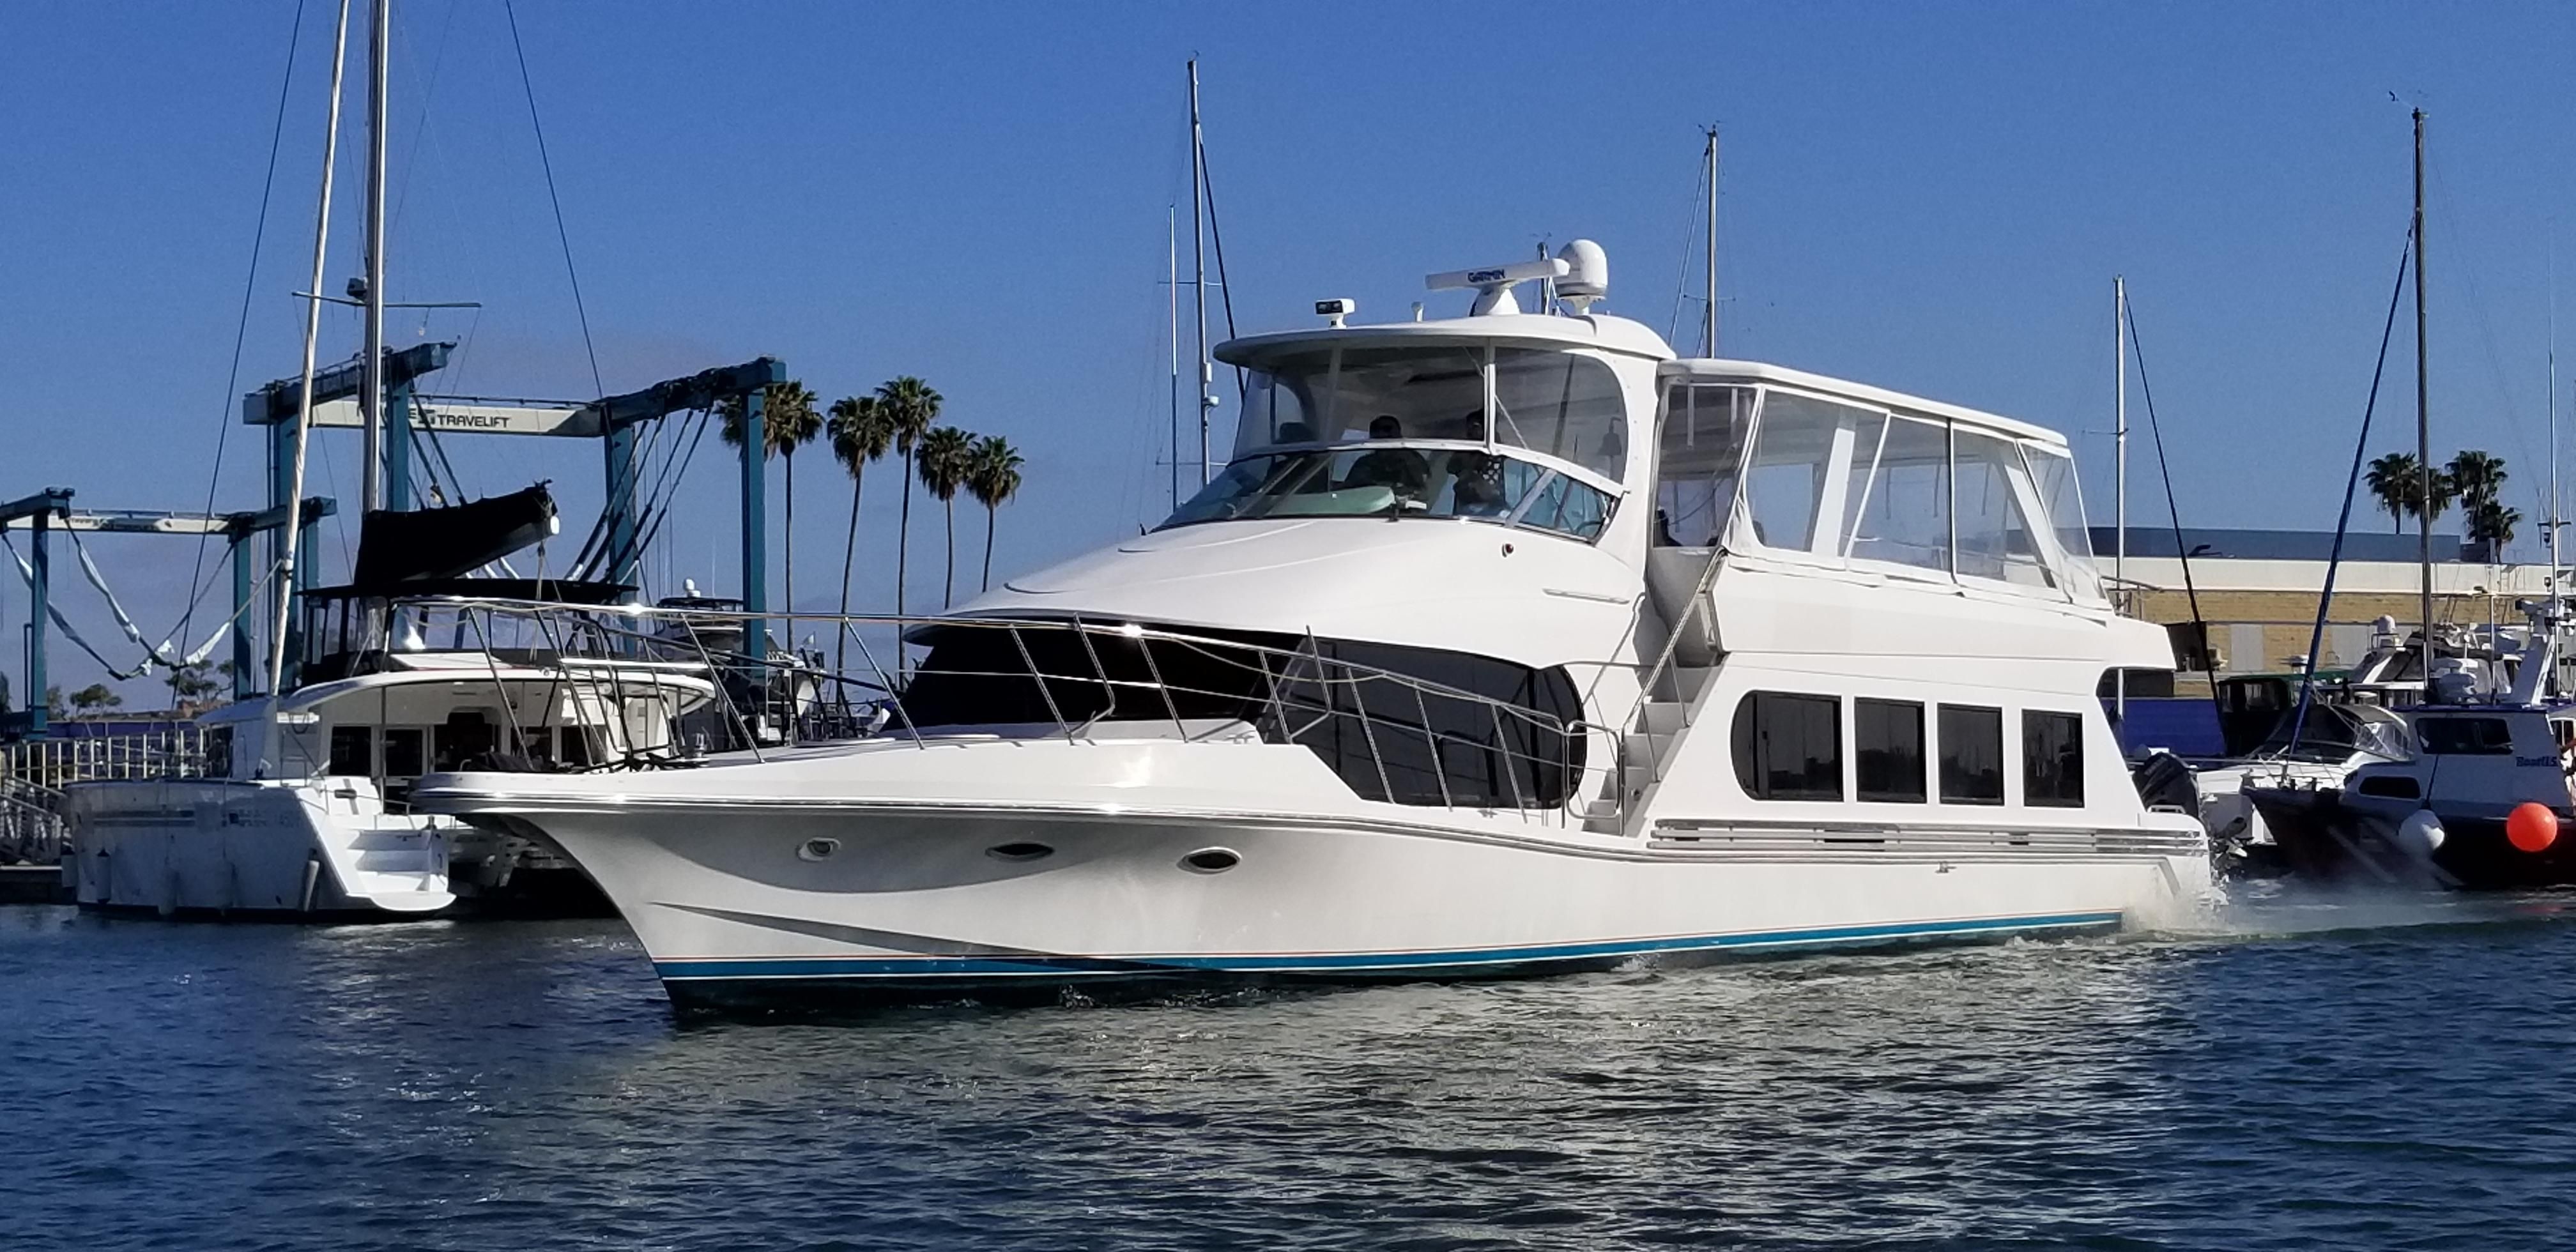 bluewater yacht for sale by owner